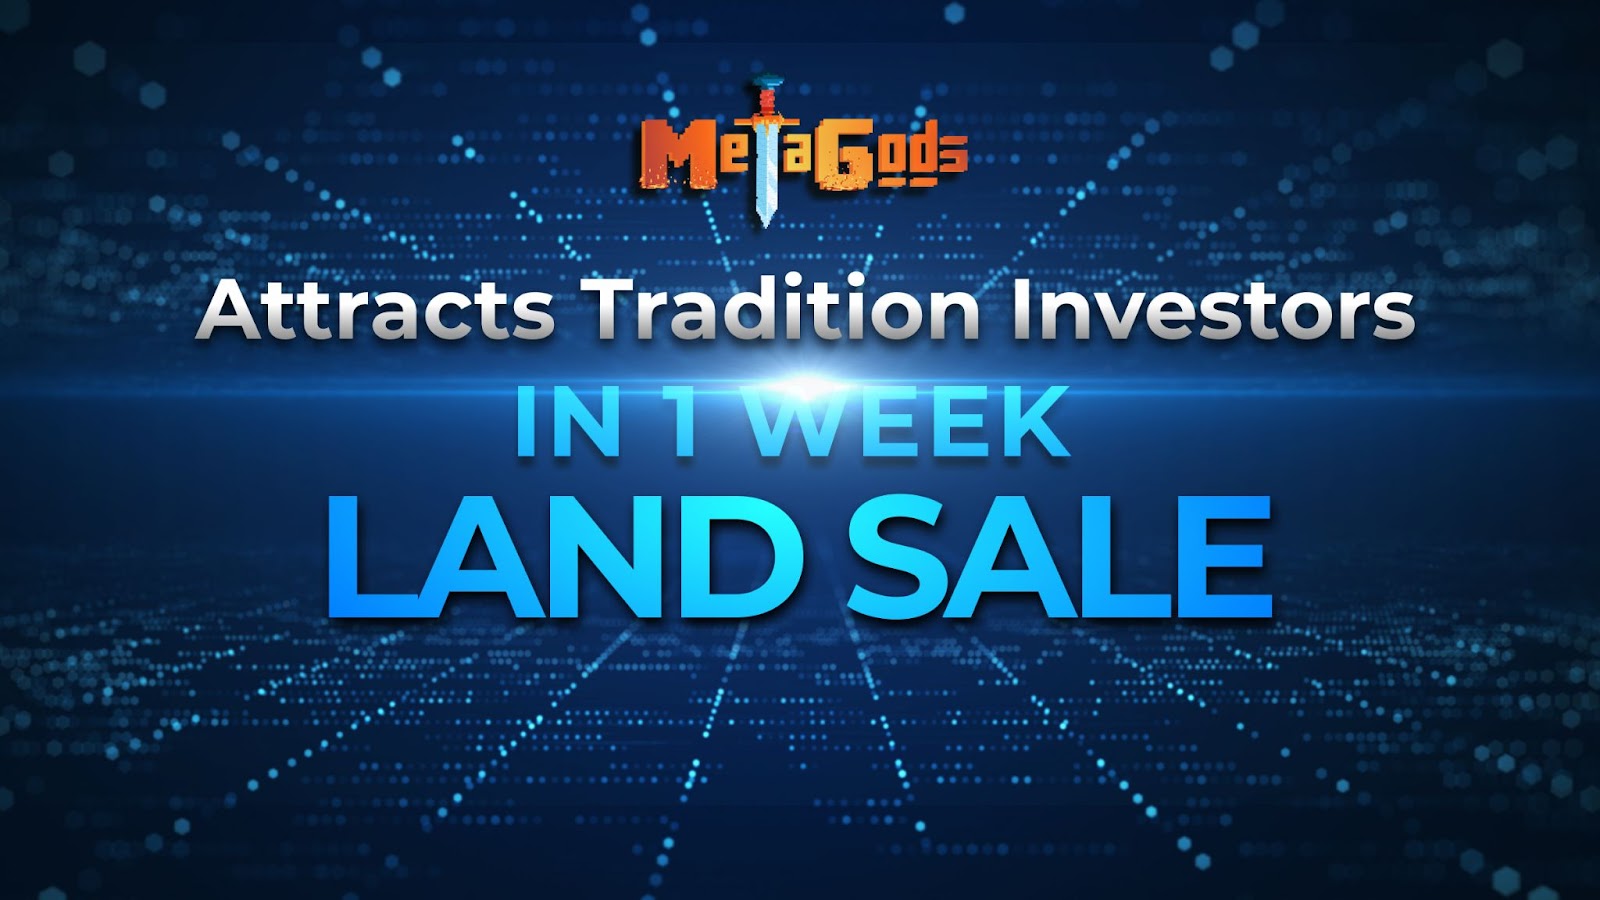 MetaGods NFT Land Sale’s Resounding Success Attracts Traditional Investors